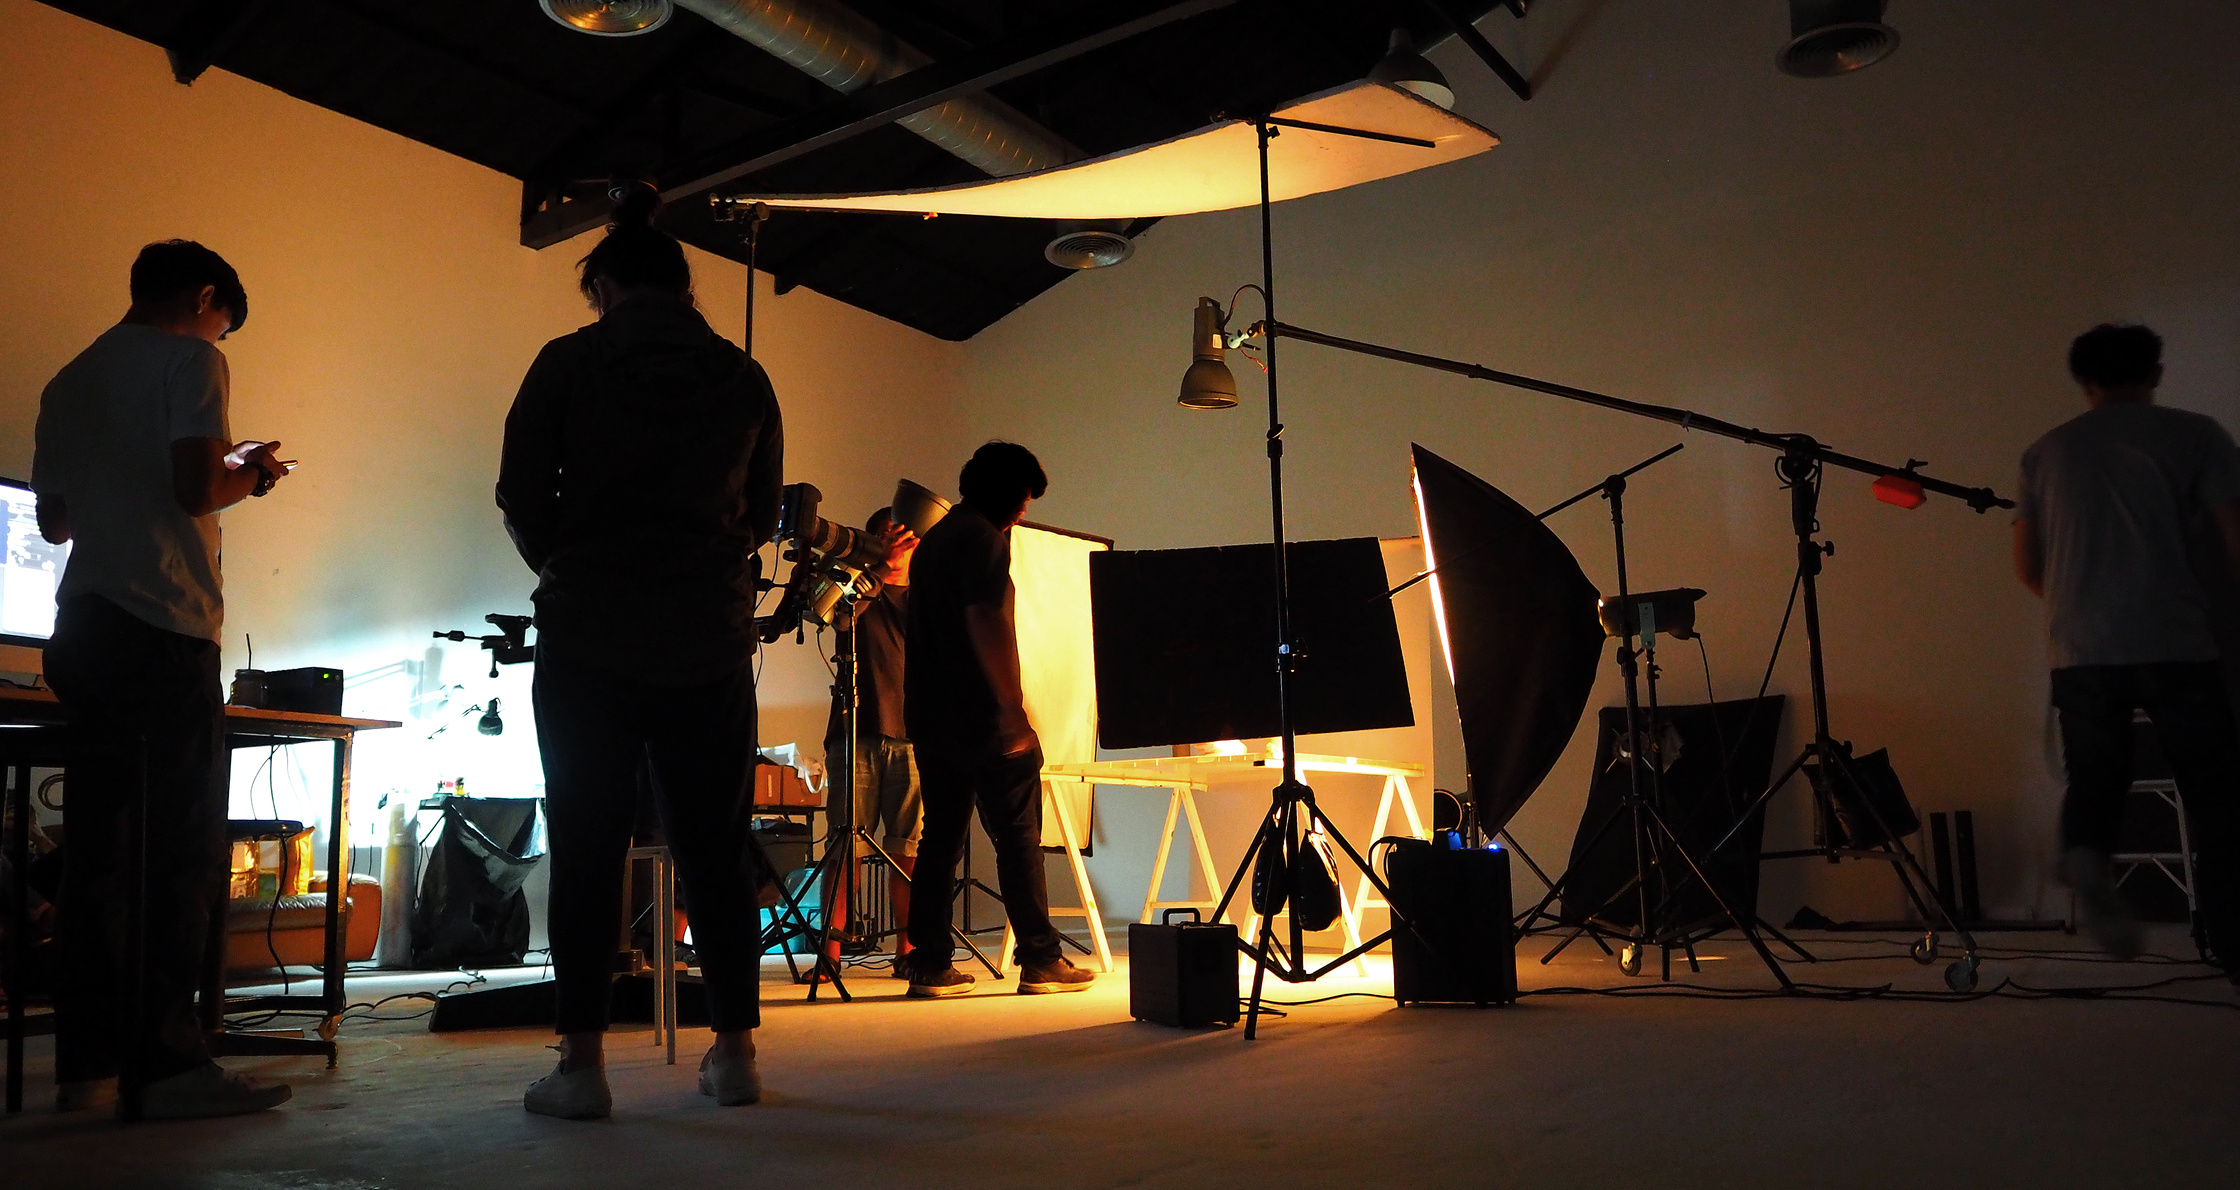 Silhouetted Production Team Shooting Video 